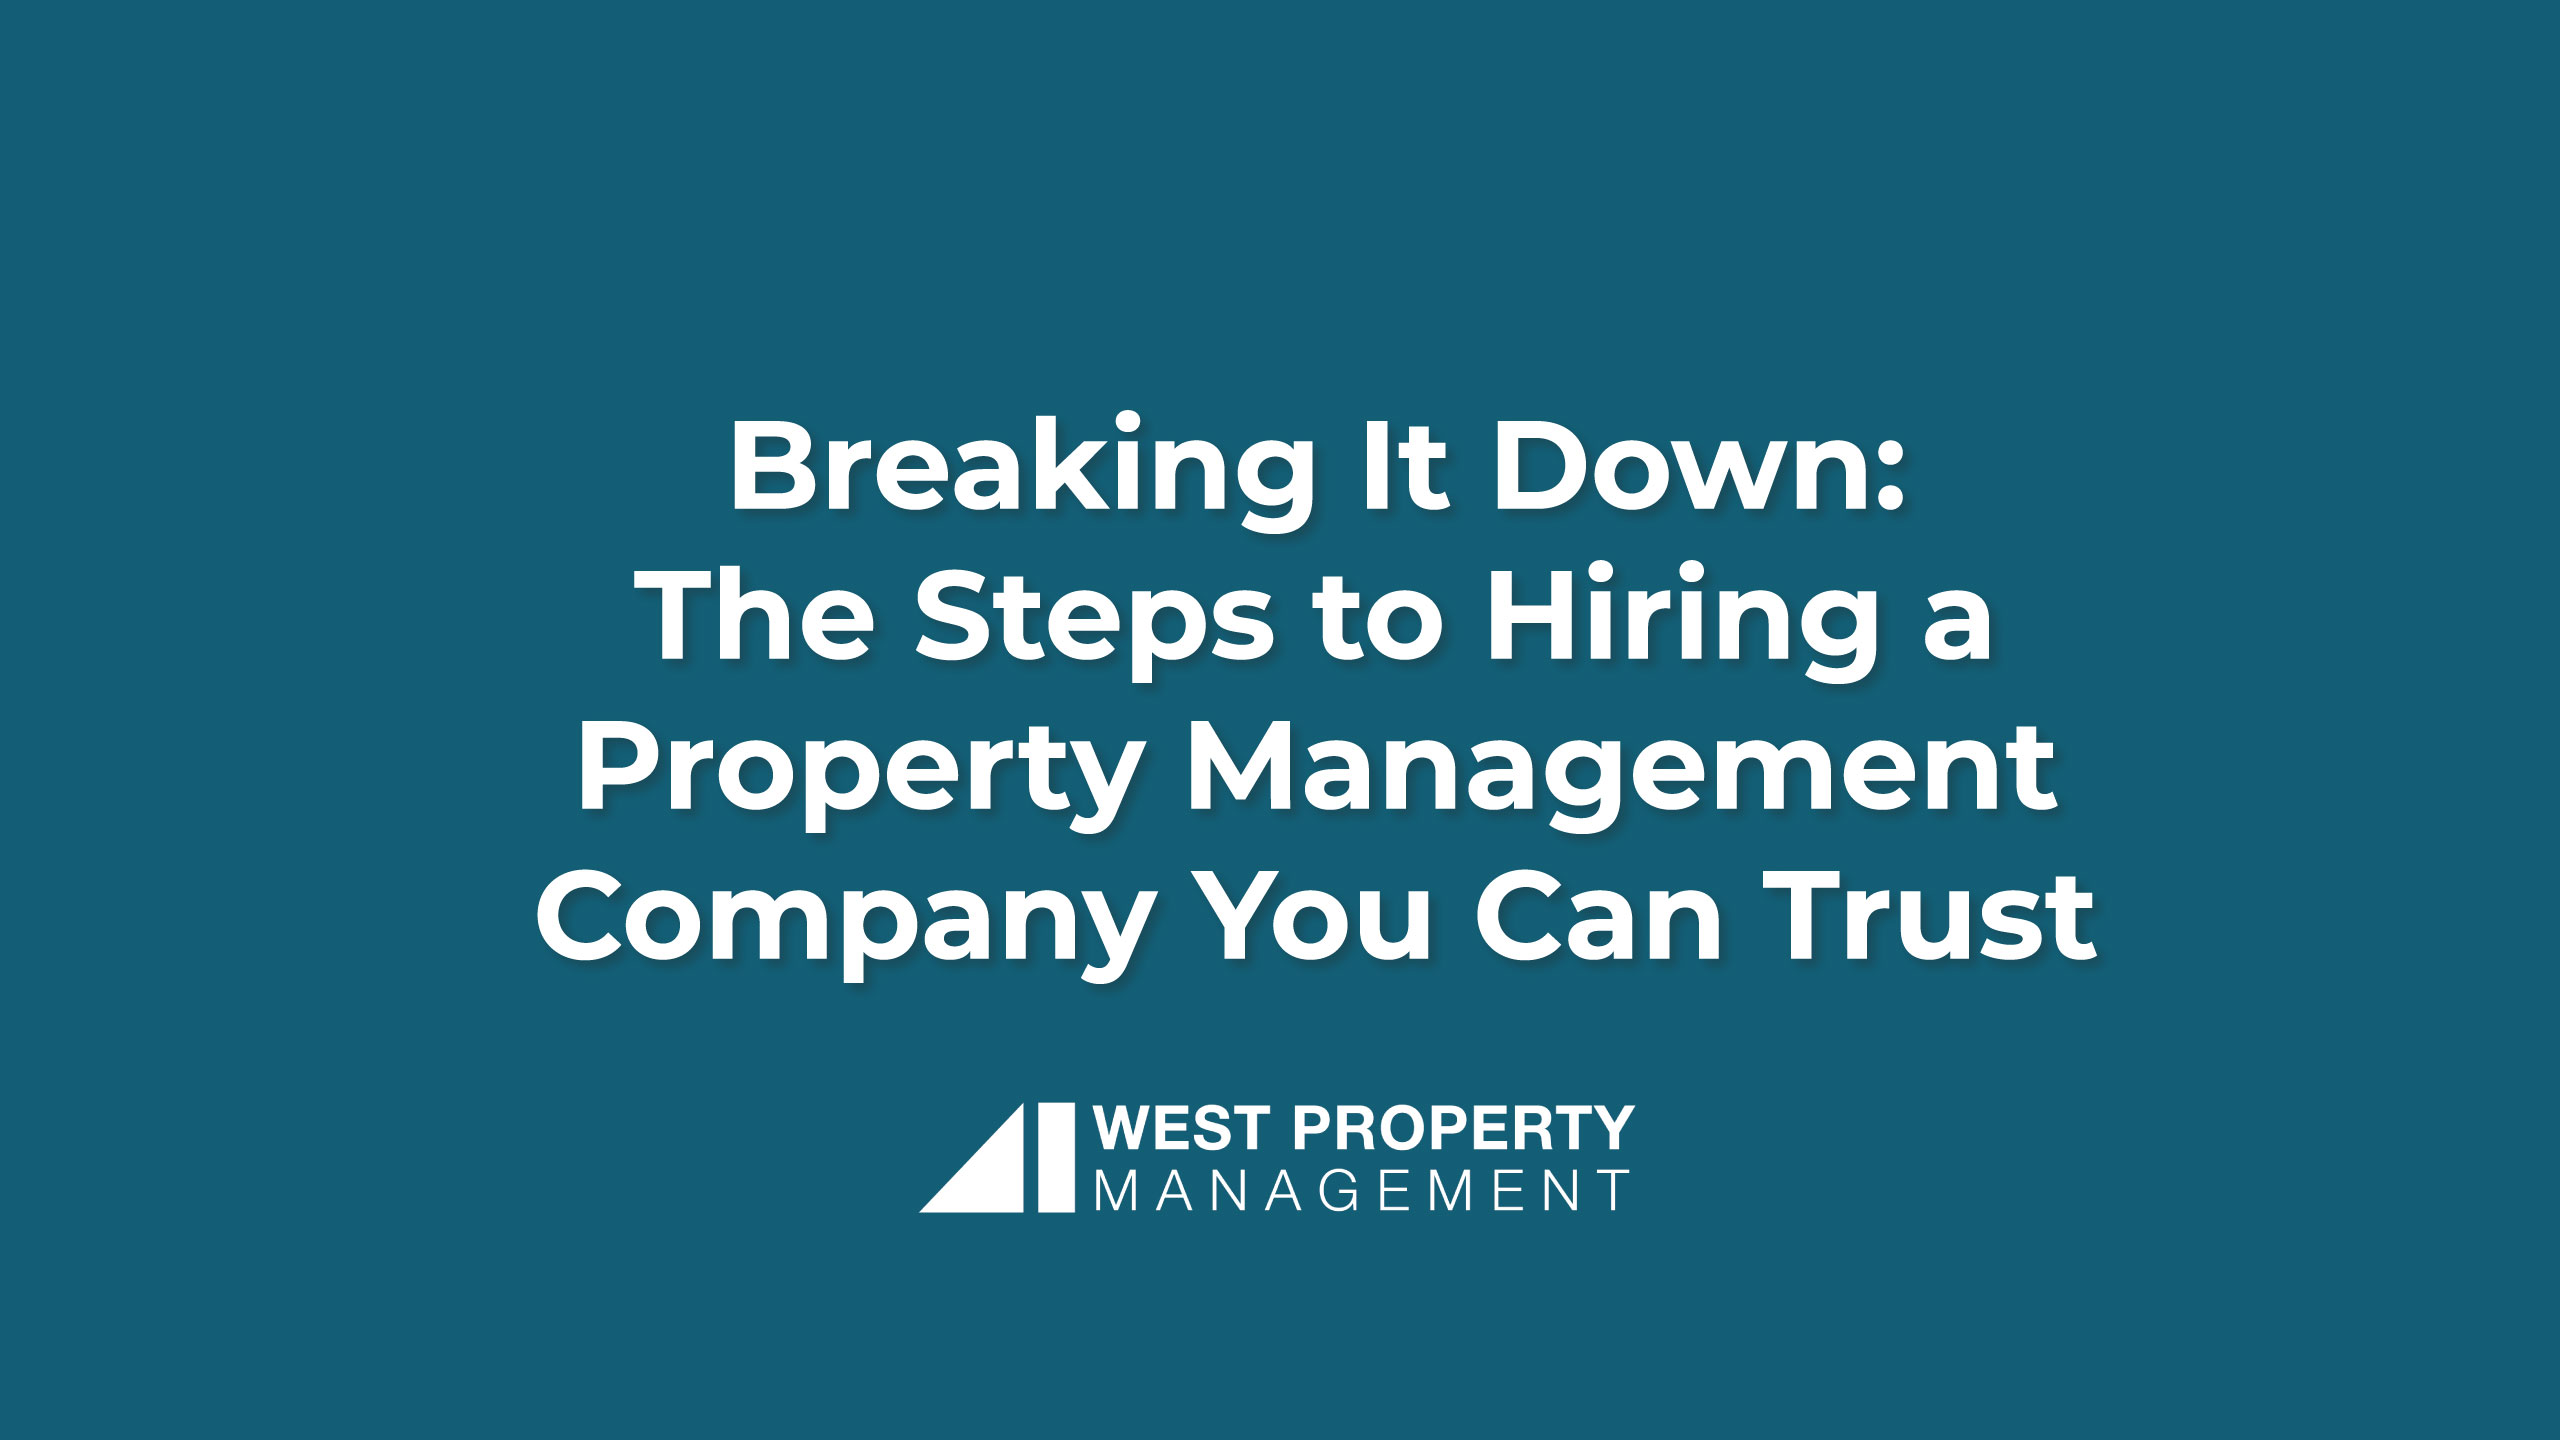 Breaking It Down: The Steps to Hiring a Property Management Company You Can Trust